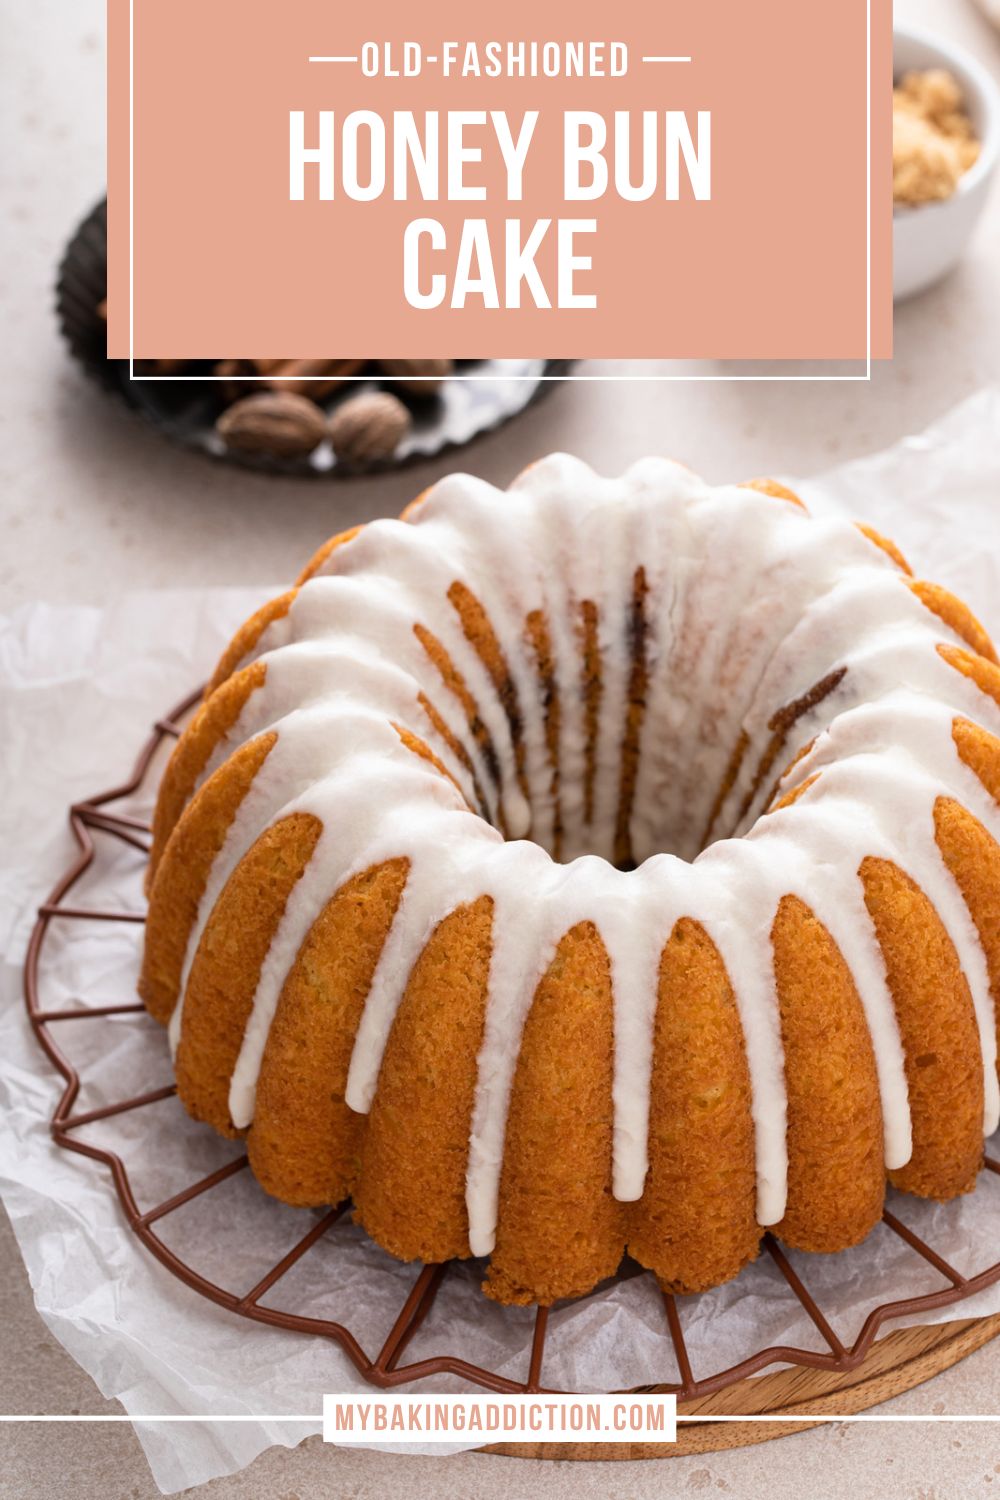 Glazed honey bun cake set on a wire rack, with whole spices visible in the background. Text overlay includes recipe name.